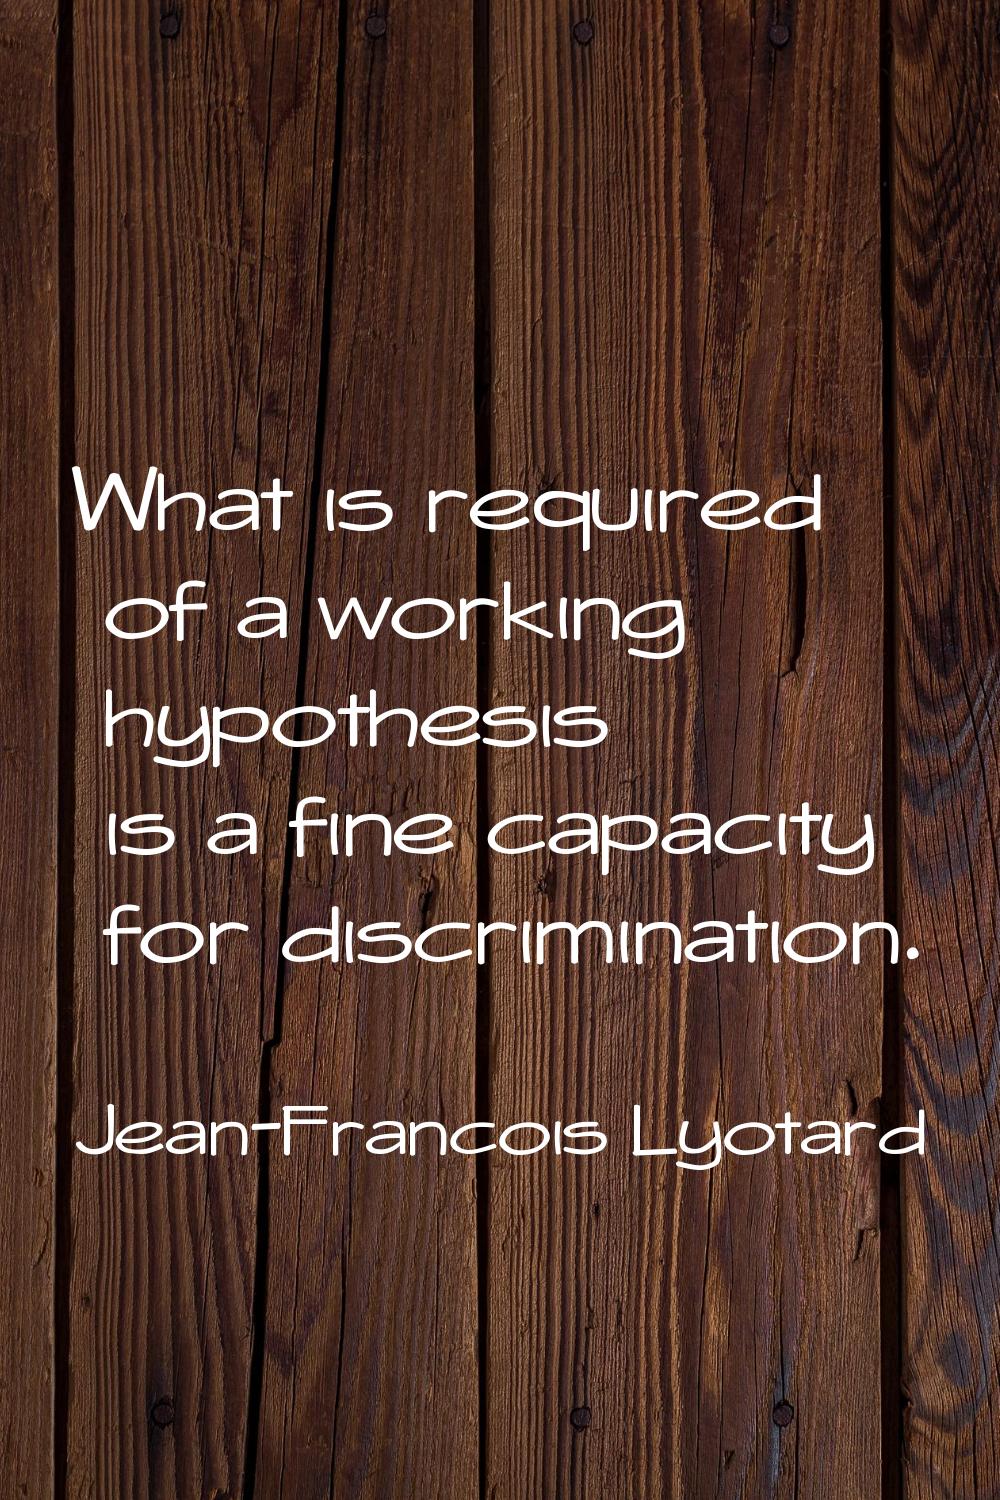 What is required of a working hypothesis is a fine capacity for discrimination.